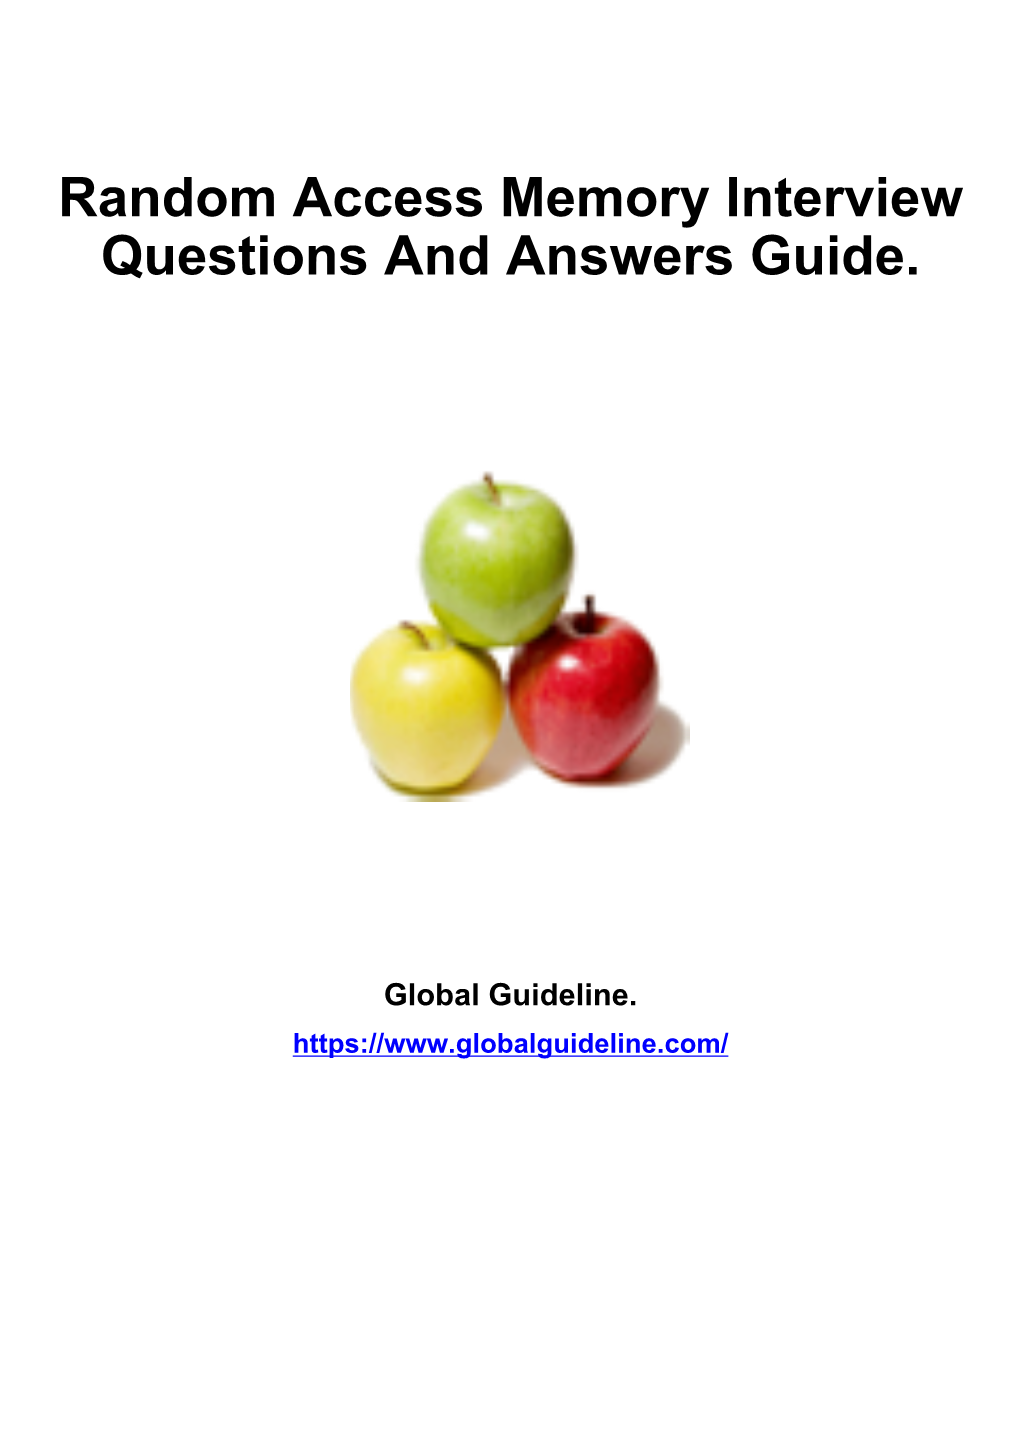 Random Access Memory Interview Questions and Answers Guide